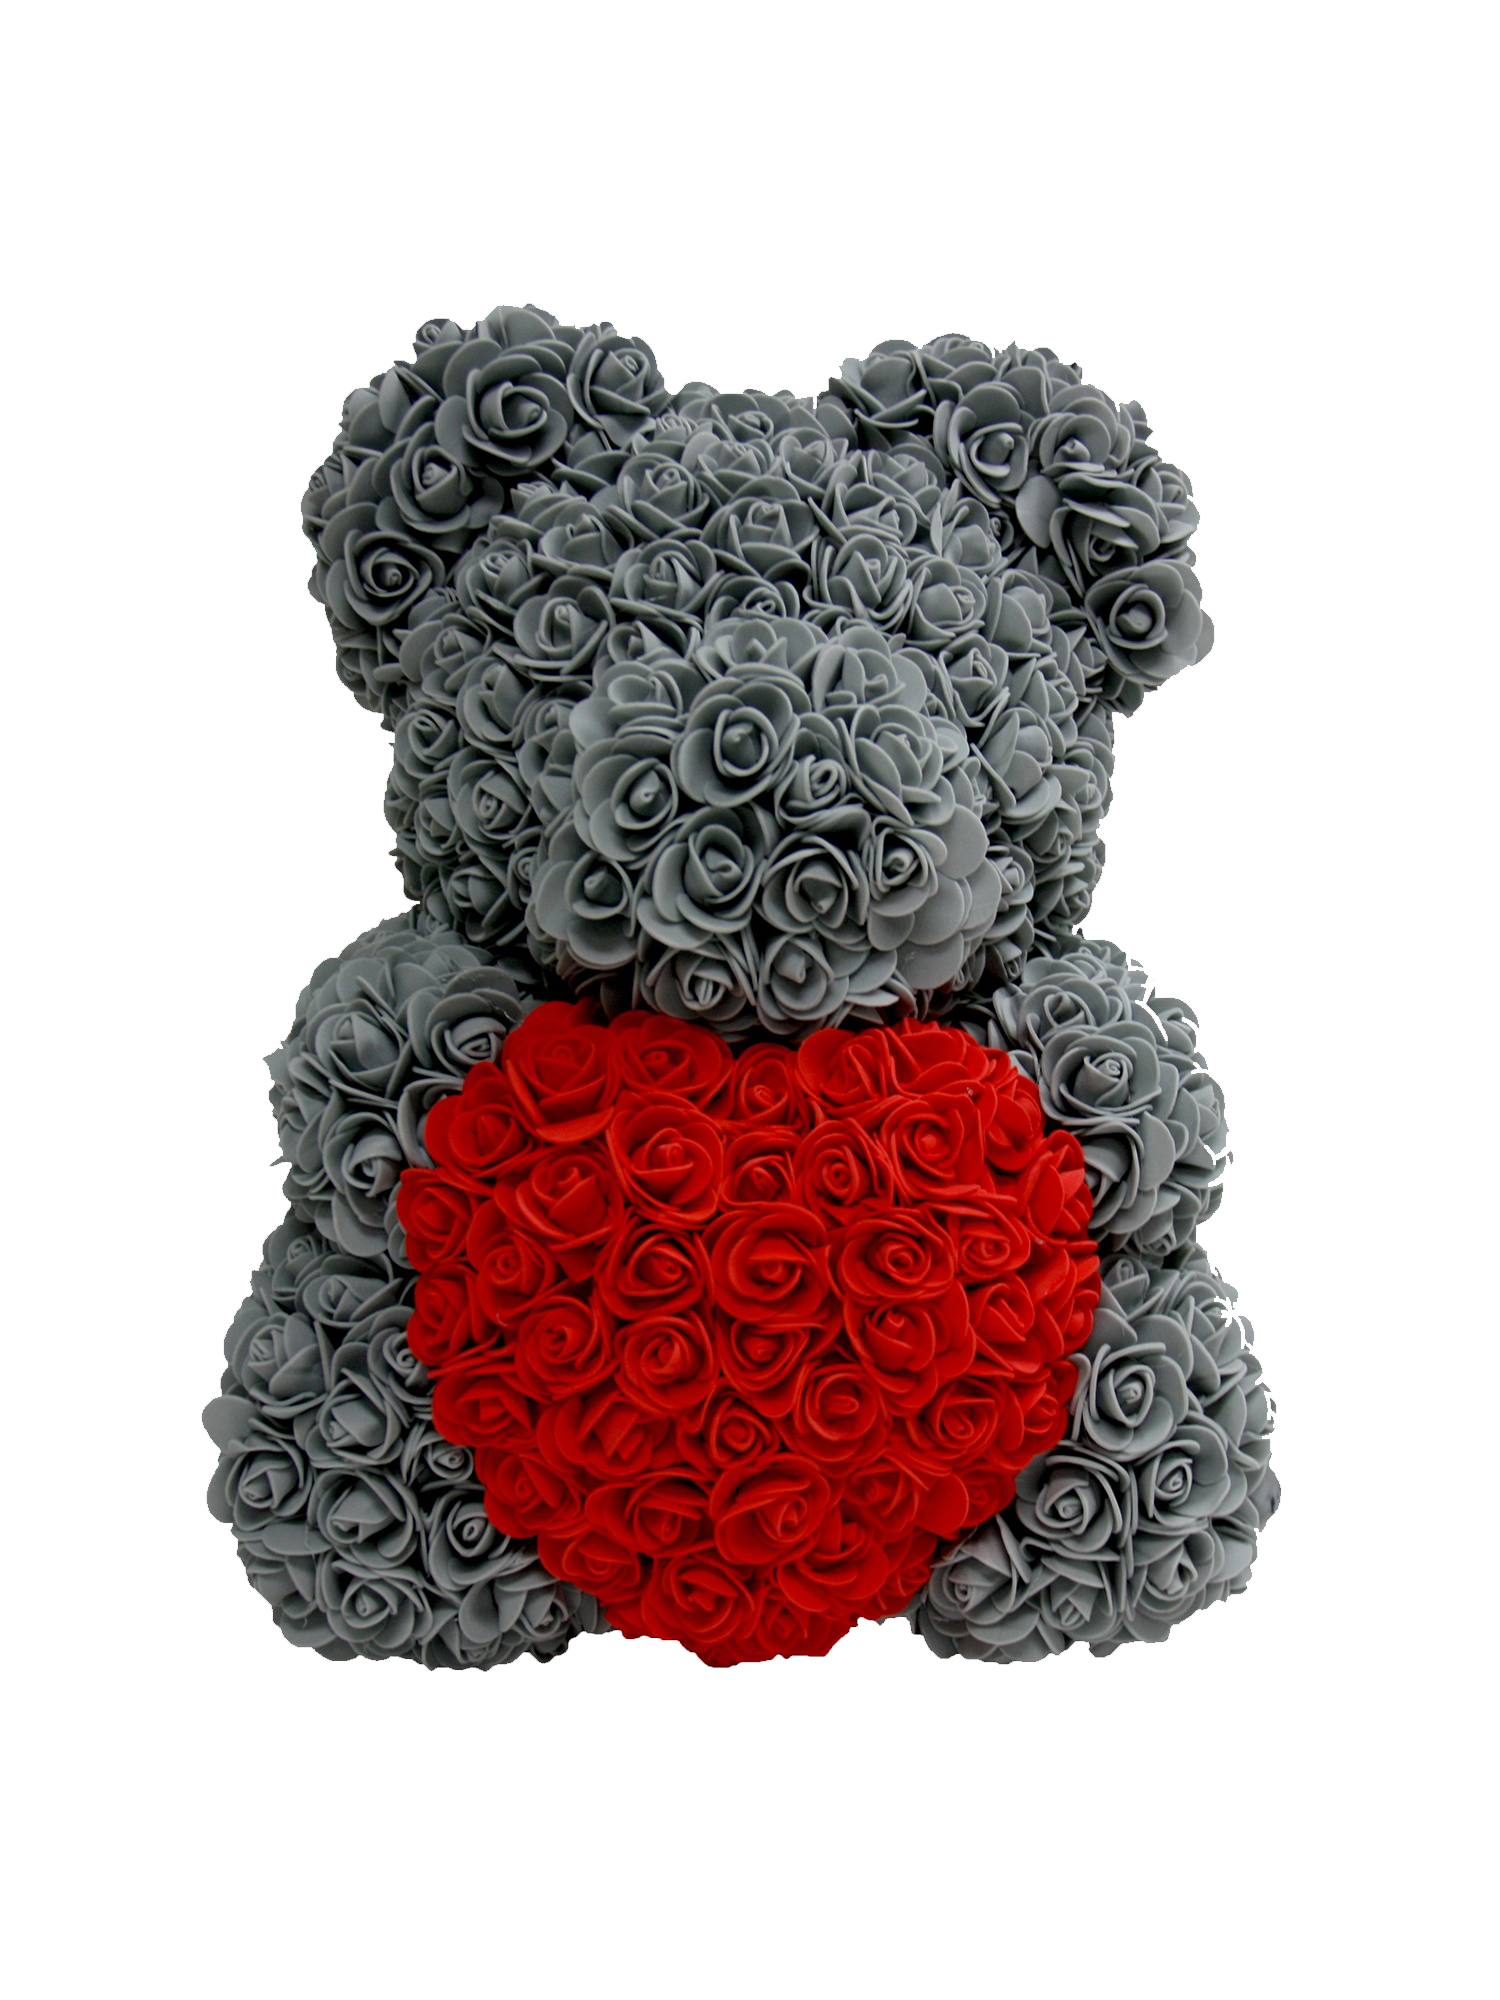 The Rose Bear with Red Heart *Valentine’s Edition*